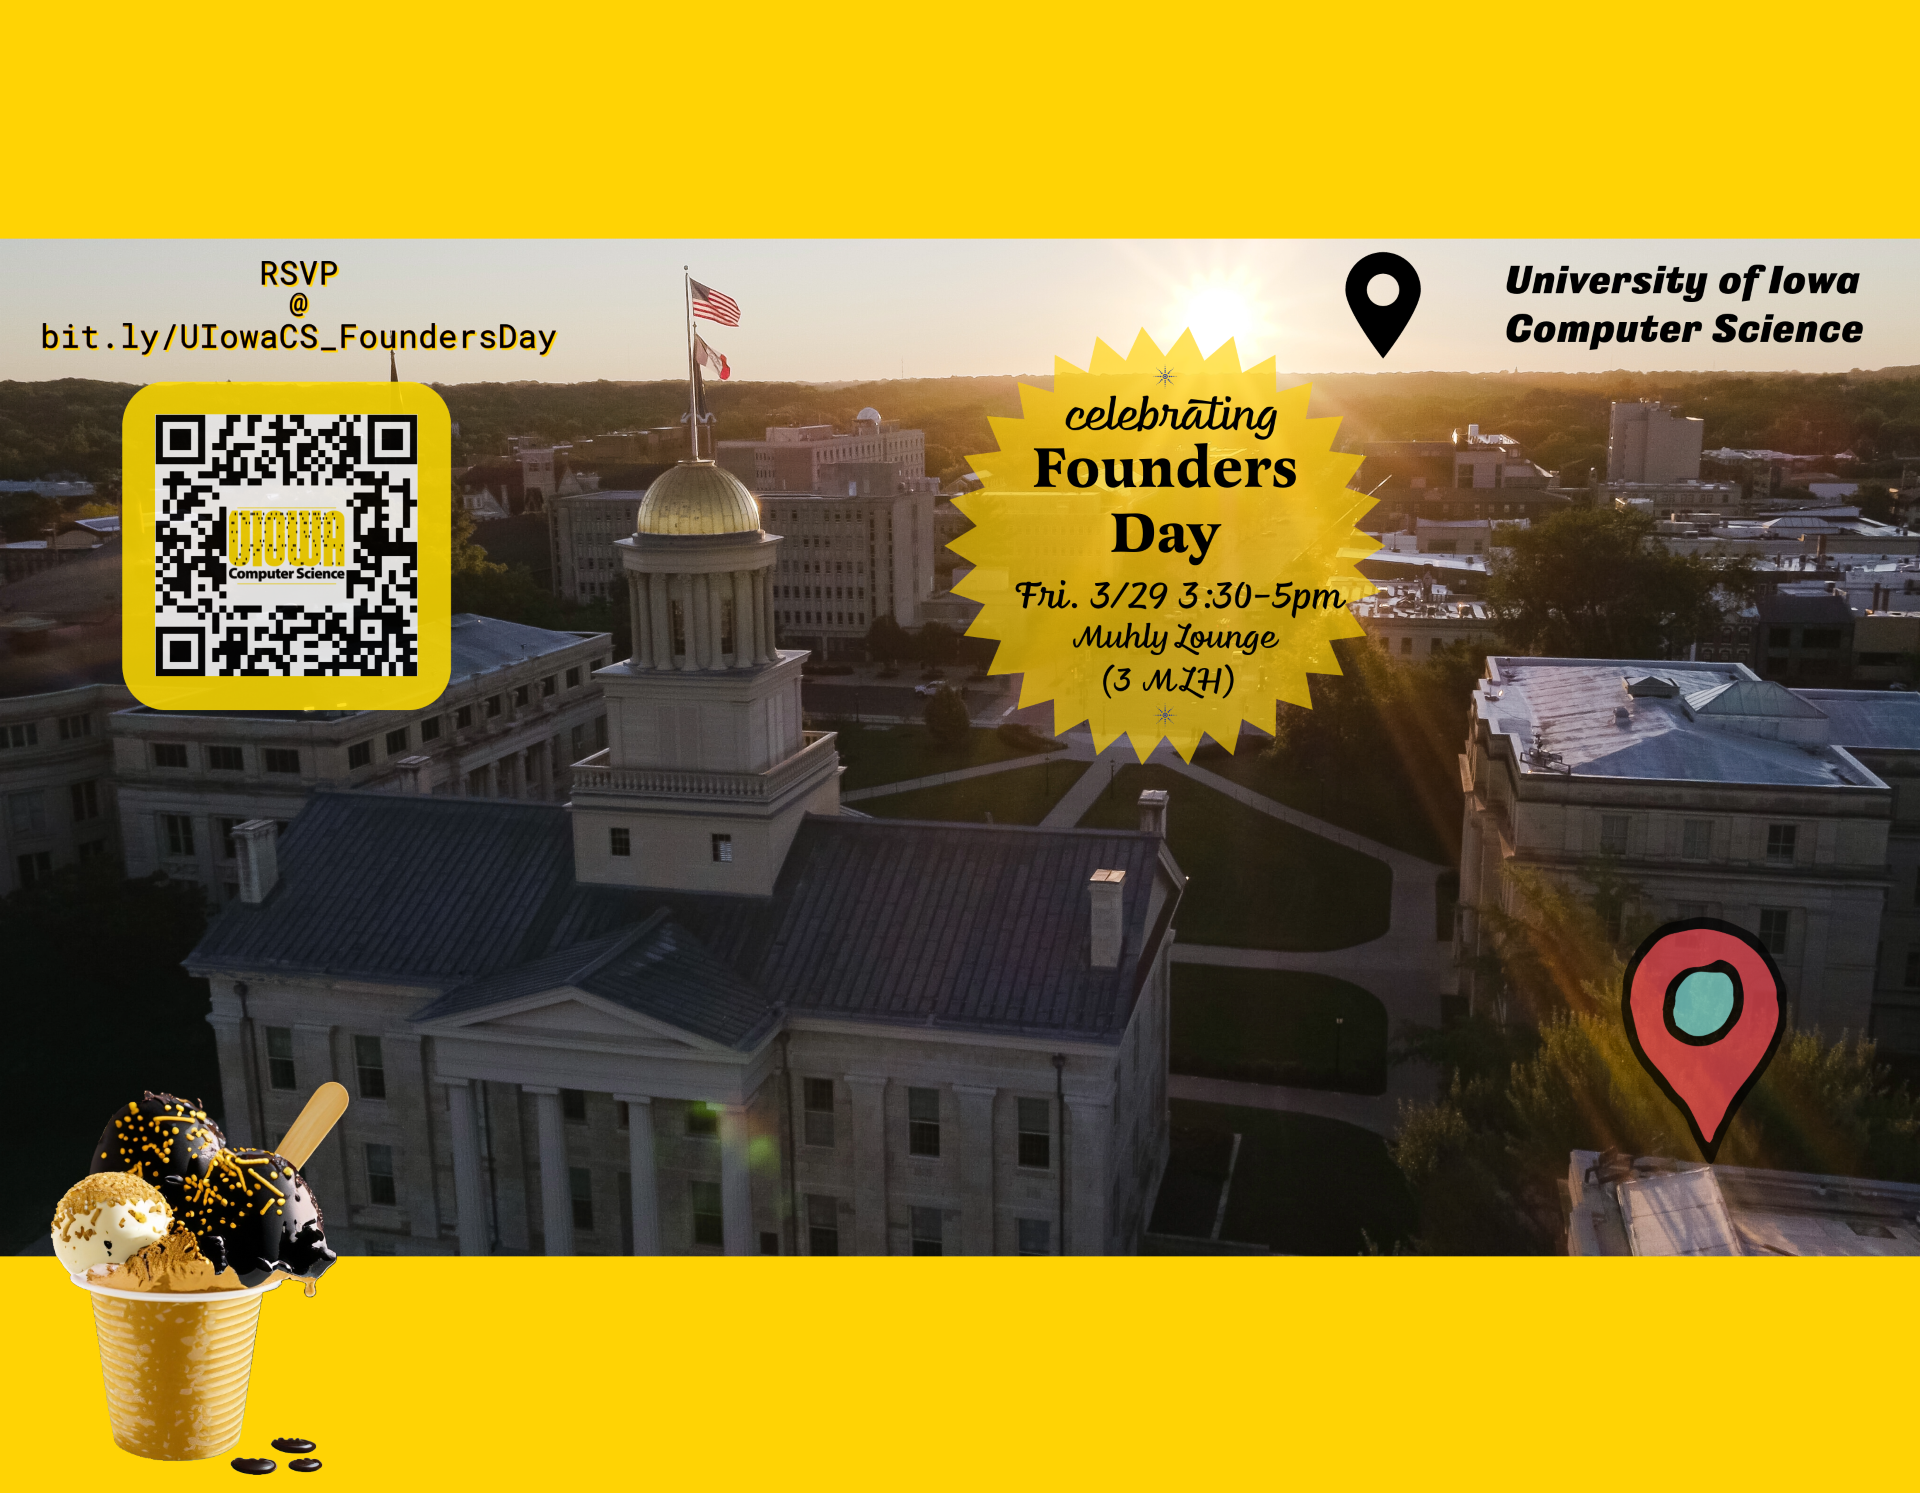 On the occasion of our 59th anniversary, the Department of Computer Science at Iowa cordially invites you to attend our second annual Founders Day Celebration. This event will be held Friday, March 29, from 3:30 to 5 p.m. in the Muhly Lounge (3 MLH).